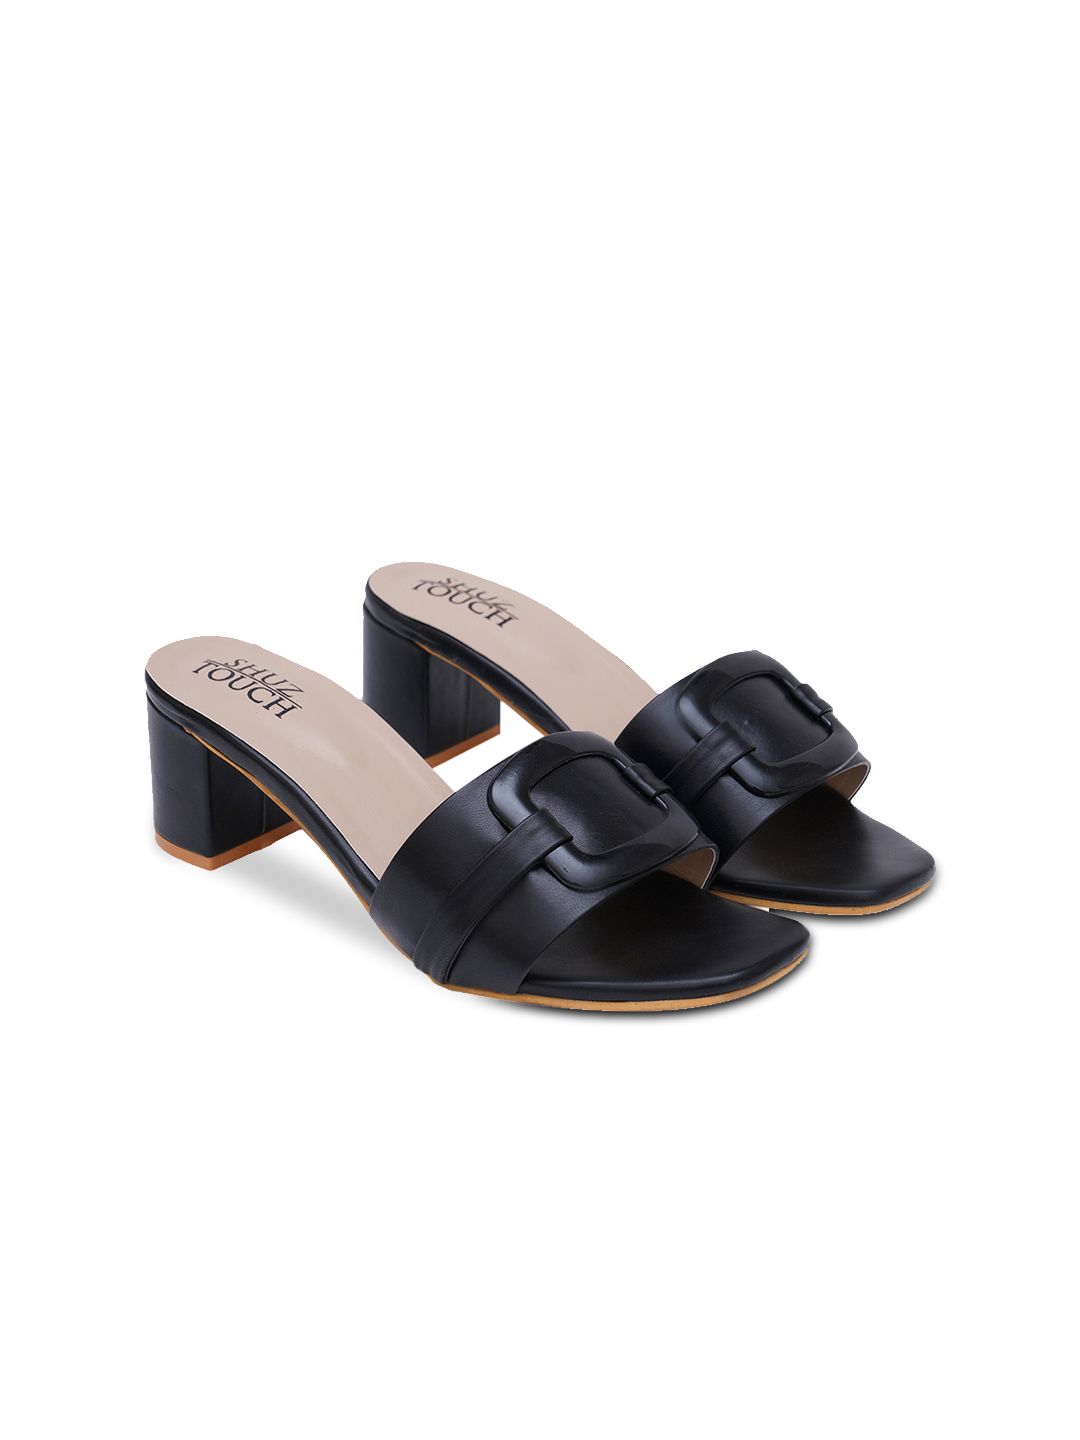 SHUZ TOUCH  mules Black  Block  heels Price in India